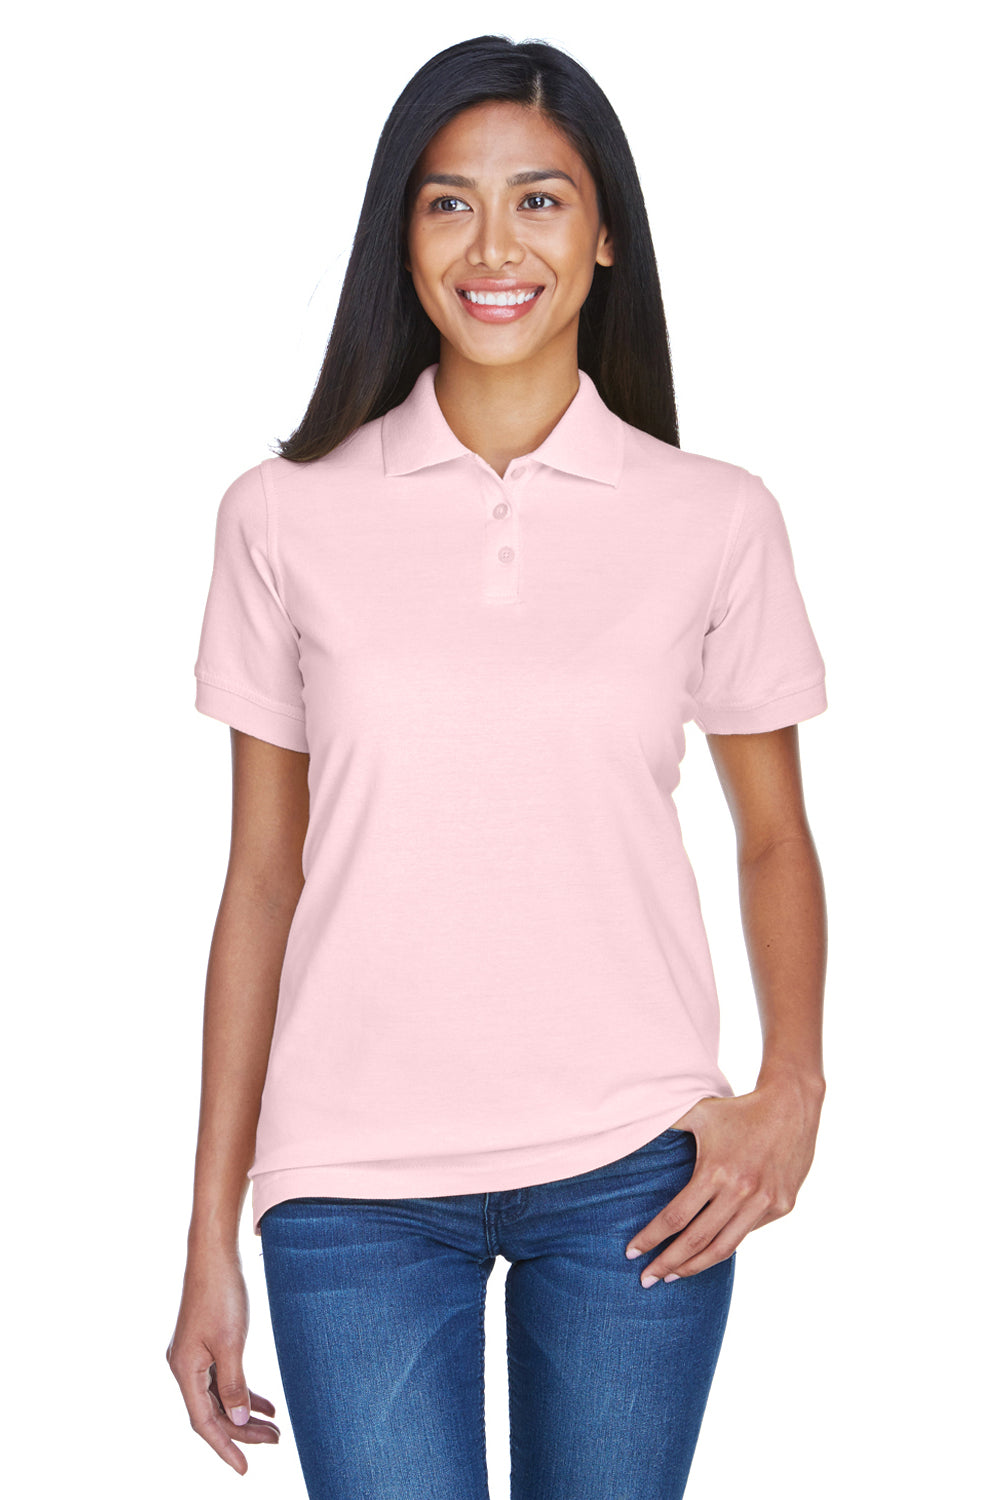 UltraClub 8530 Womens Classic Short Sleeve Polo Shirt Pink Front